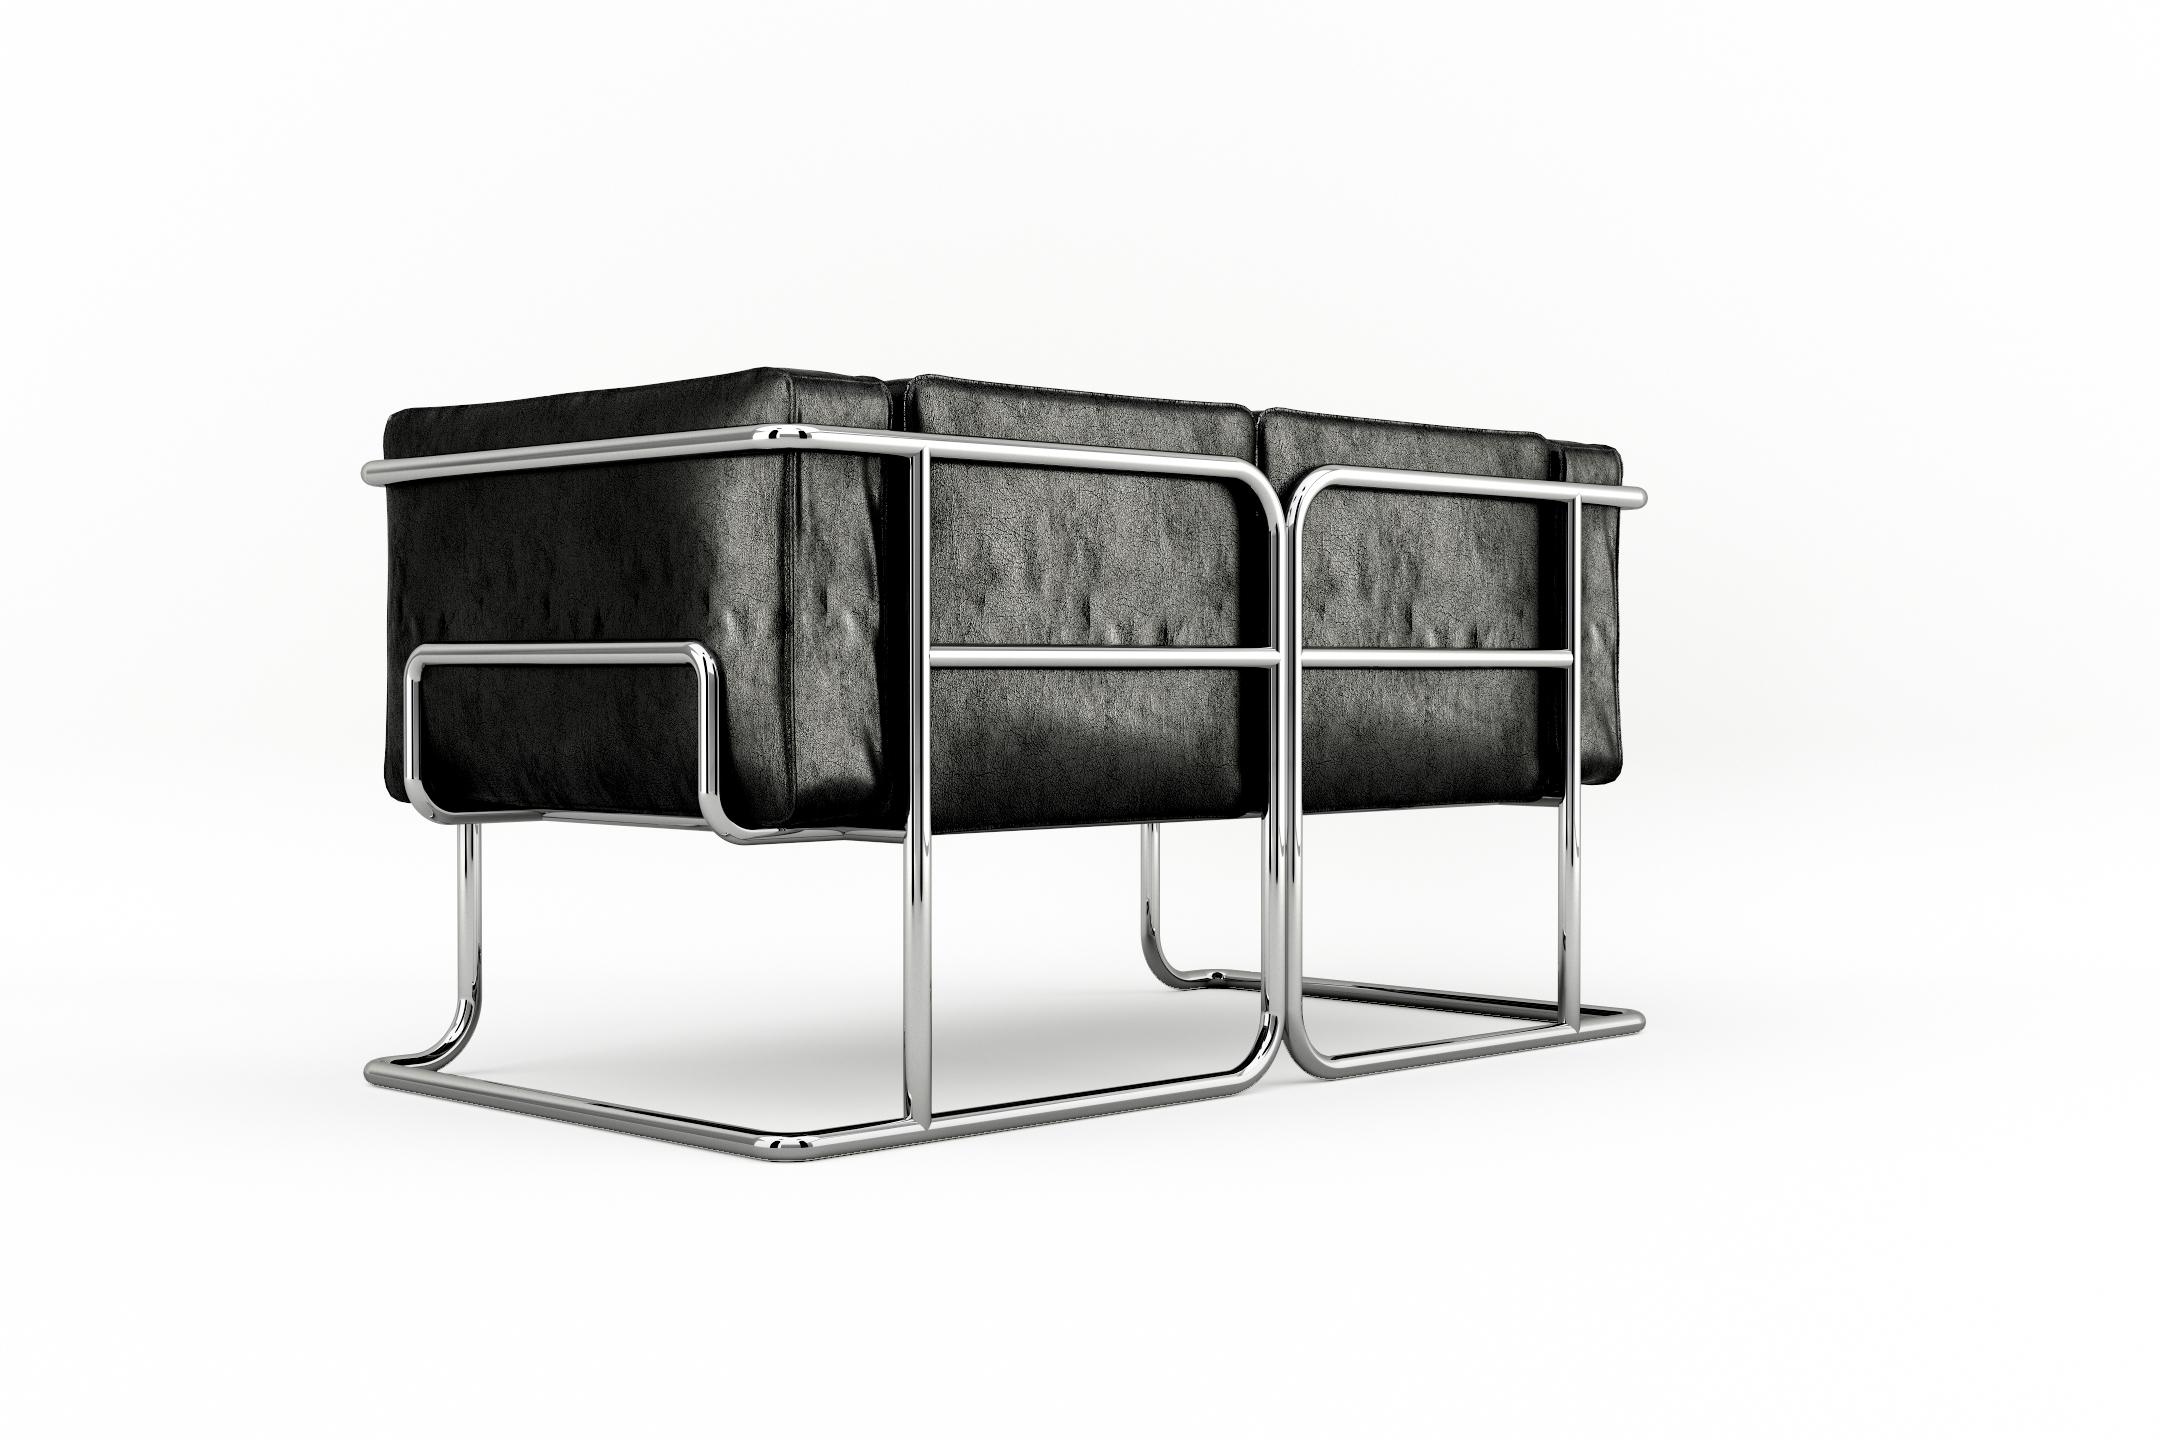 Polished Lotus 2 Seat Sofa - Modern Black Leather Sofa with Stainless Steel Legs For Sale